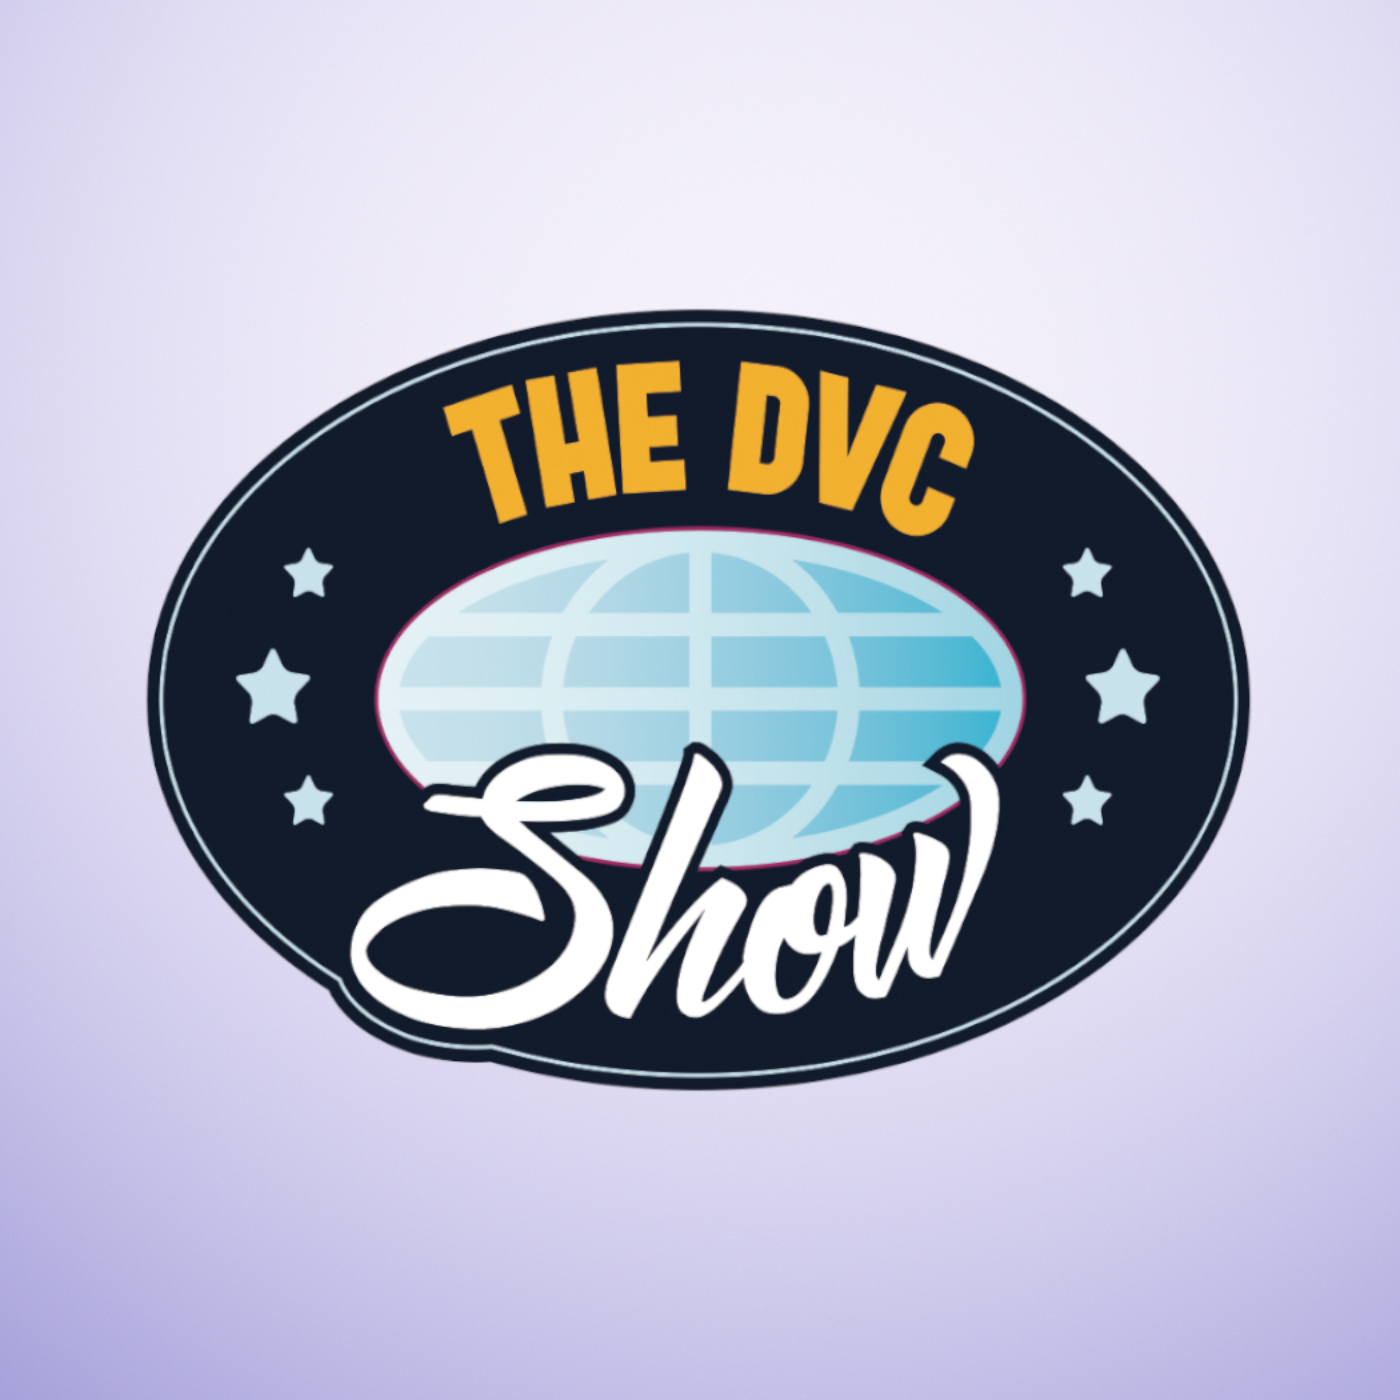 The DVC Show Podcast – 01/20/20